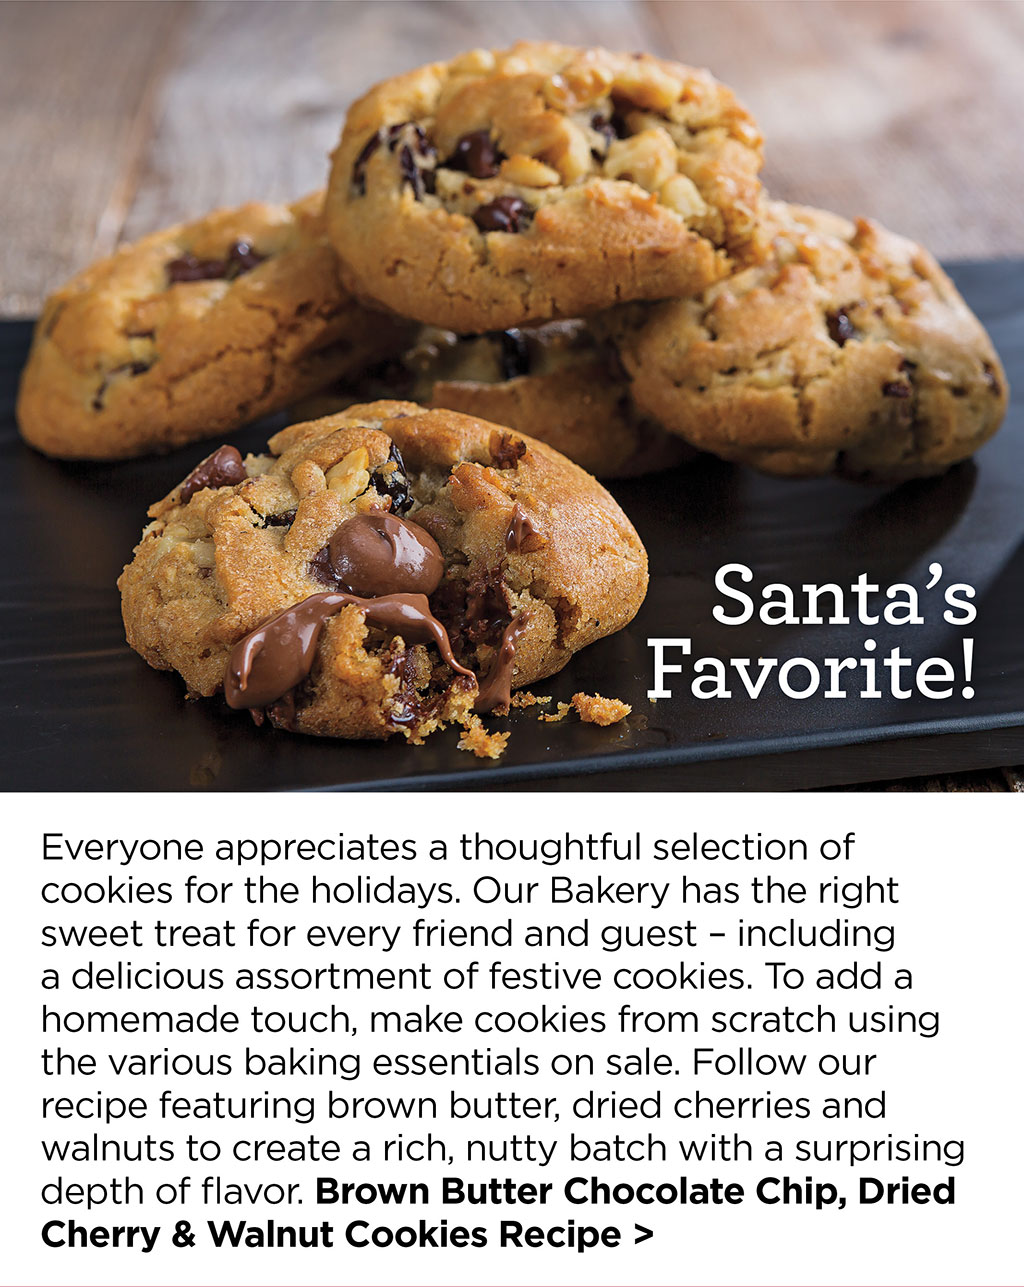 Santas Favorite! Everyone appreciates a thoughtful selection of cookies for the holidays. Our Bakery has the right sweet treat for every friend and guest  including a delicious assortment of festive cookies. To add a homemade touch, make cookies from scratch using the various baking essentials on sale. Follow our recipe featuring brown butter, dried cherries and walnuts to create a rich, nutty batch with a surprising depth of flavor. Brown Butter Chocolate Chip, Dried Cherry & Walnut Cookies Recipe >